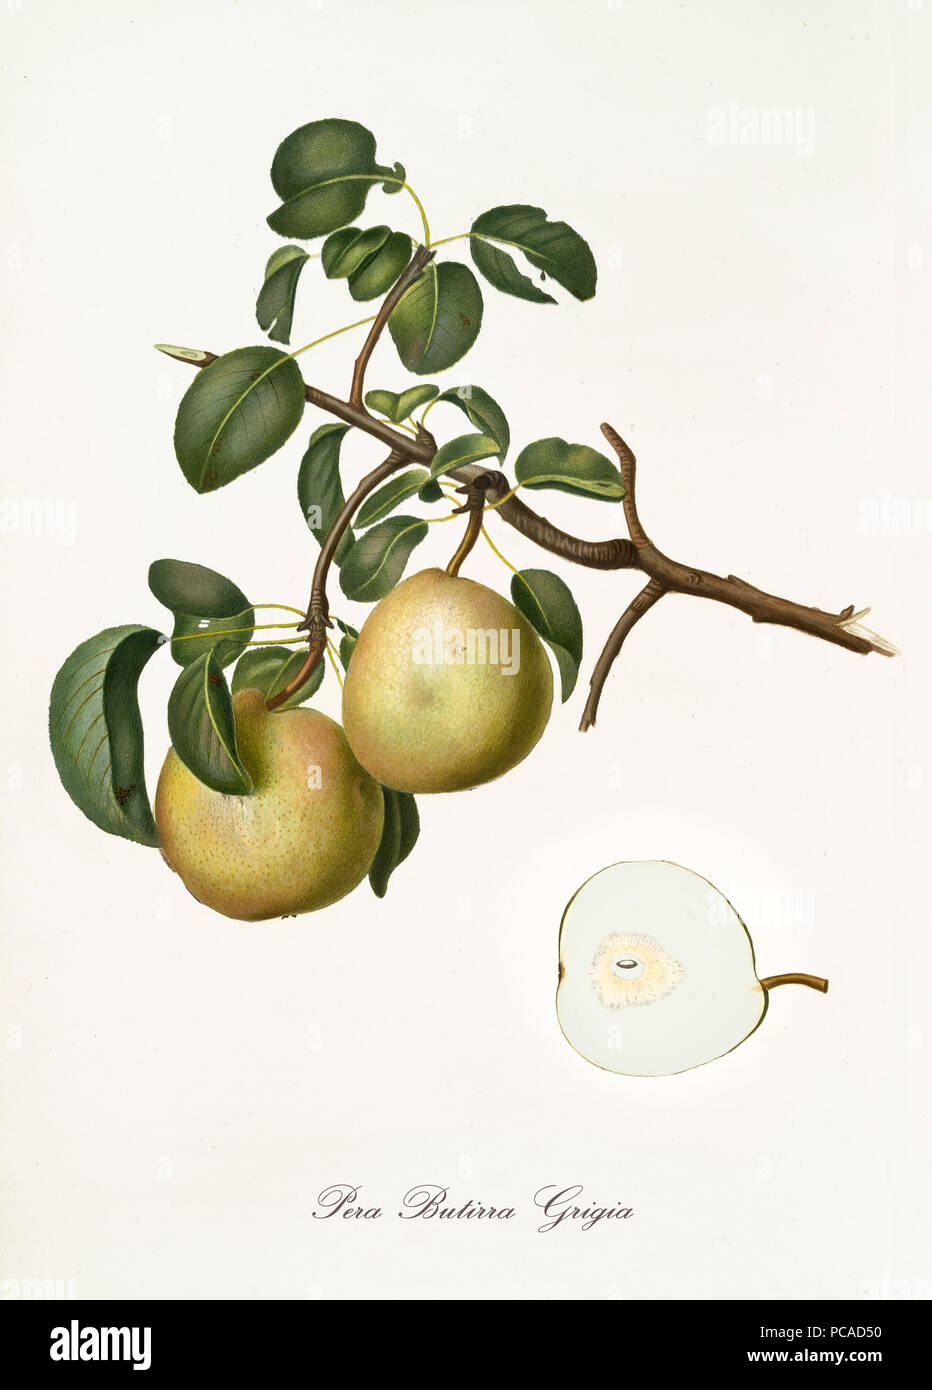 Pear, called Butirra pear, on a single branch with leaves and isolated single pear section on white background. Old botanical detailed illustration realized by Giorgio Gallesio on 1817, 1839 Stock Photo